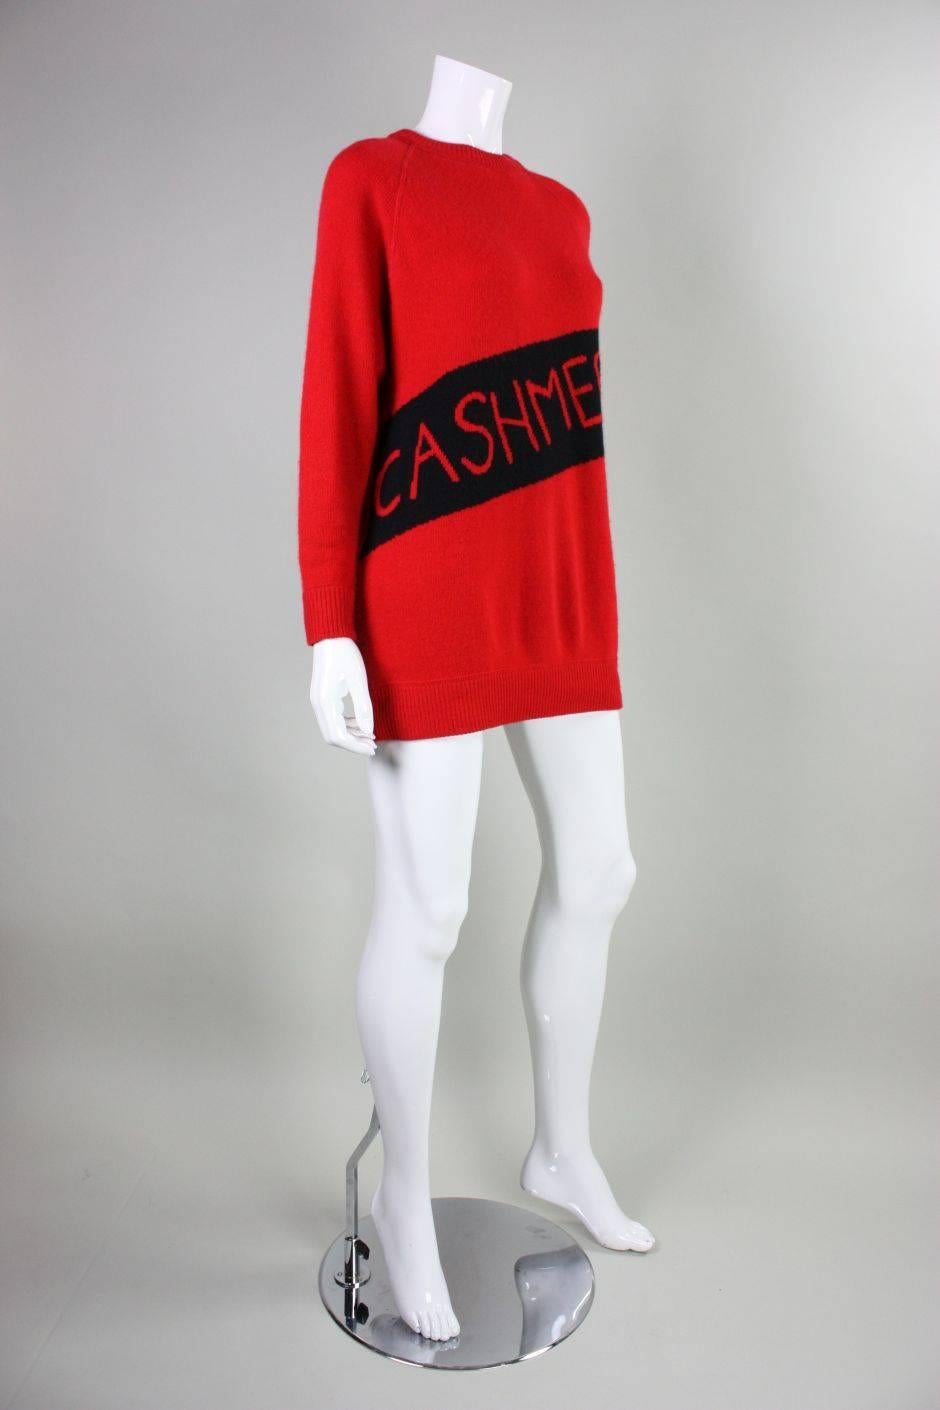 Vintage sweater from William Kasper California dates to the 1980's through early 1990's and is made of red cashmere wool.  It humorously has the word "Cashmere" woven diagonally across the front so that everyone knows that you are wearing